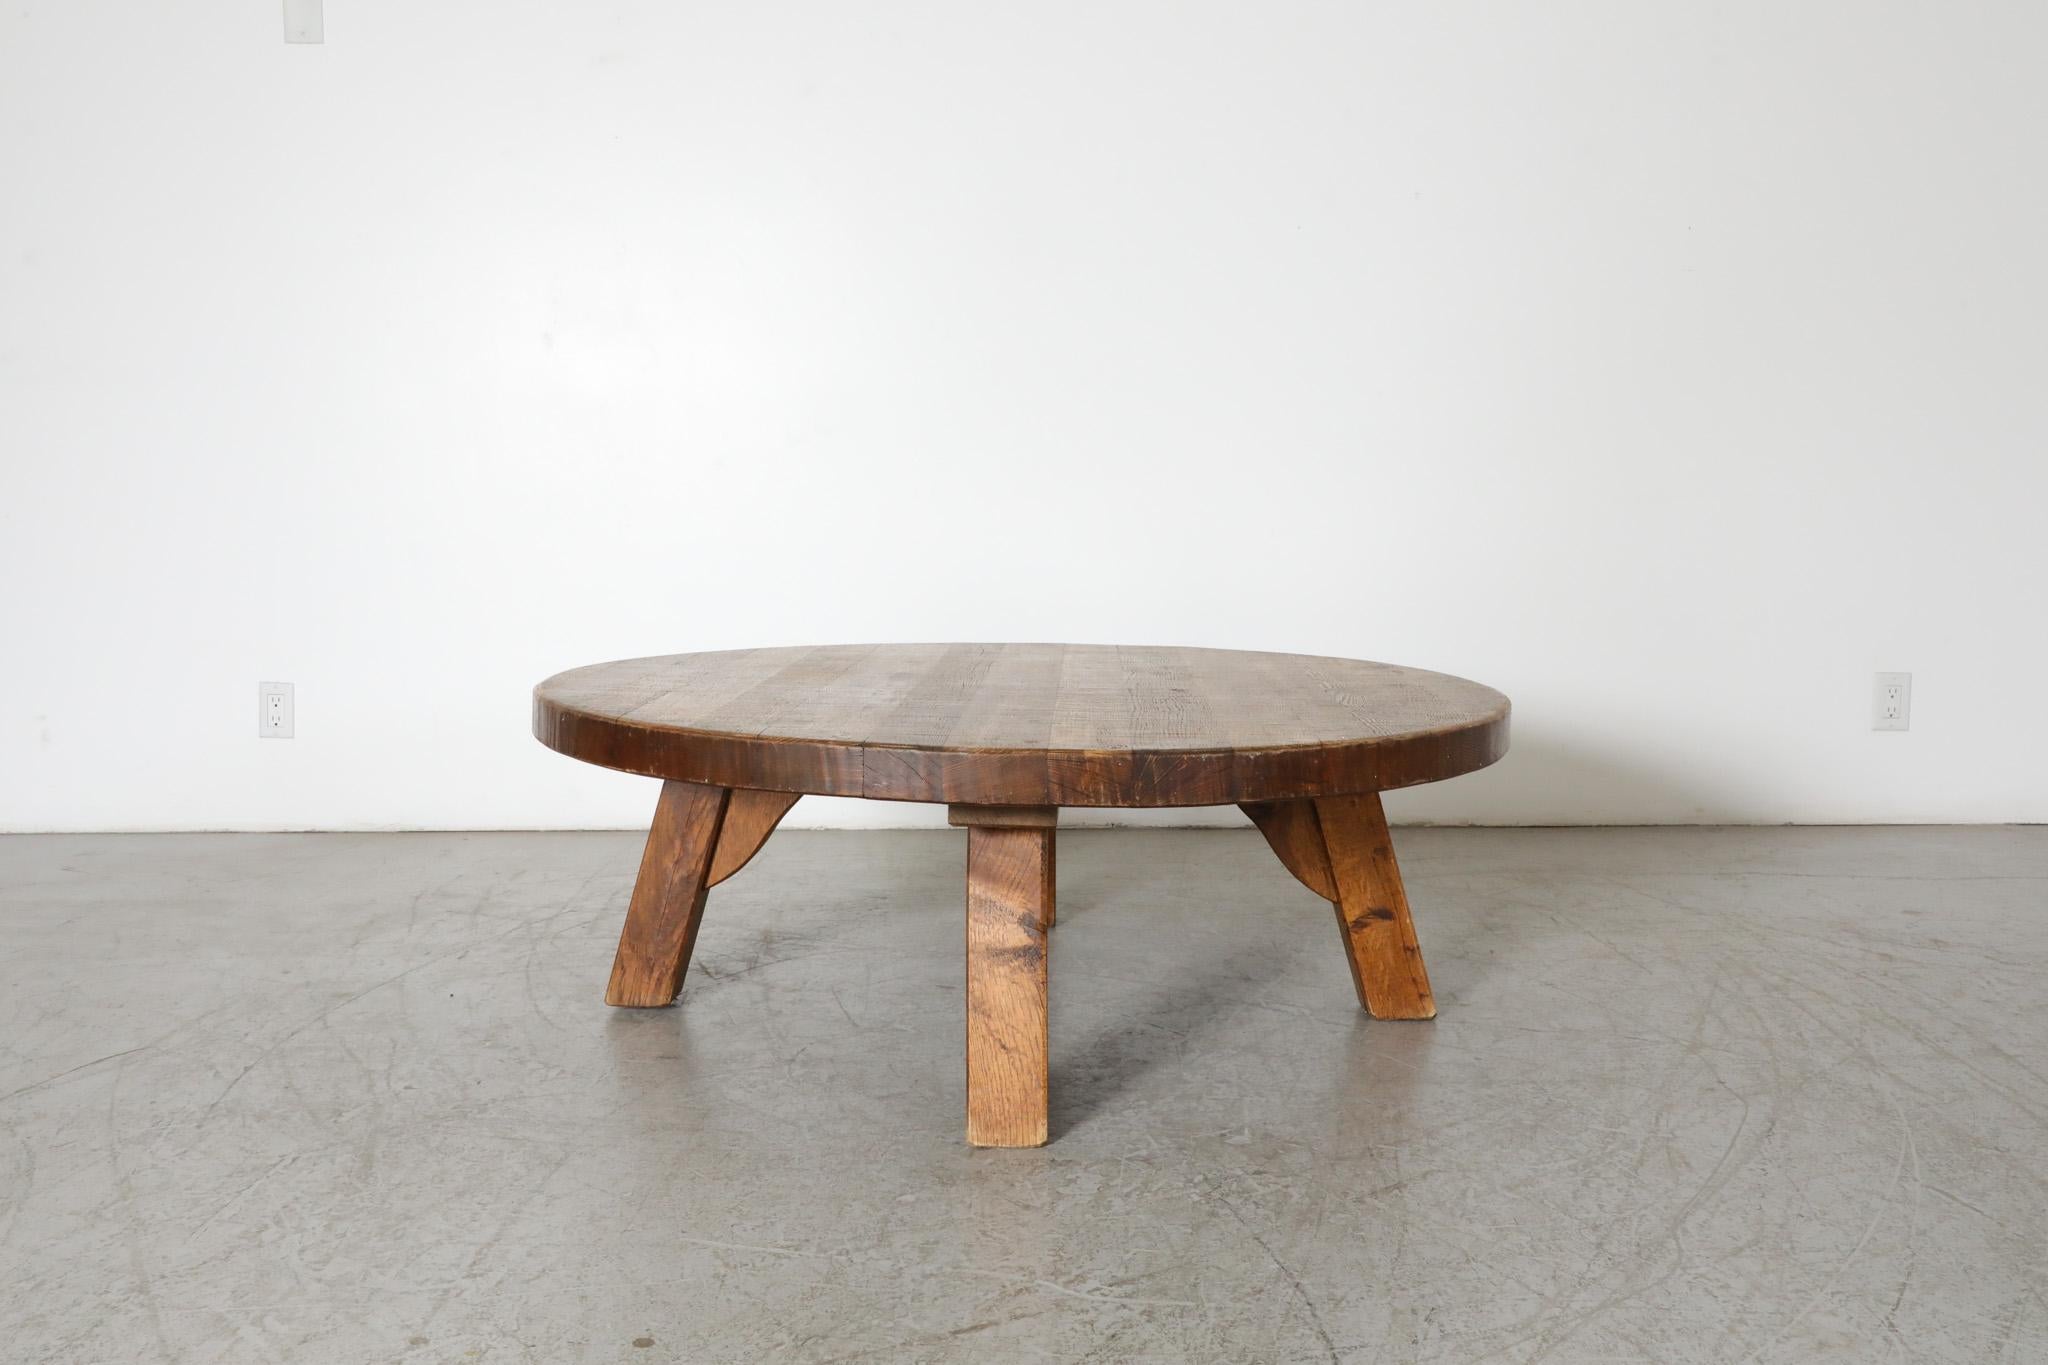 Brutalist, heavy round coffee table is made from solid oak and has three sturdy square legs. Reminiscent of the work of Pierre Chapo, the French post war designer that worked extensively with wood. In original condition with visible wear and patina